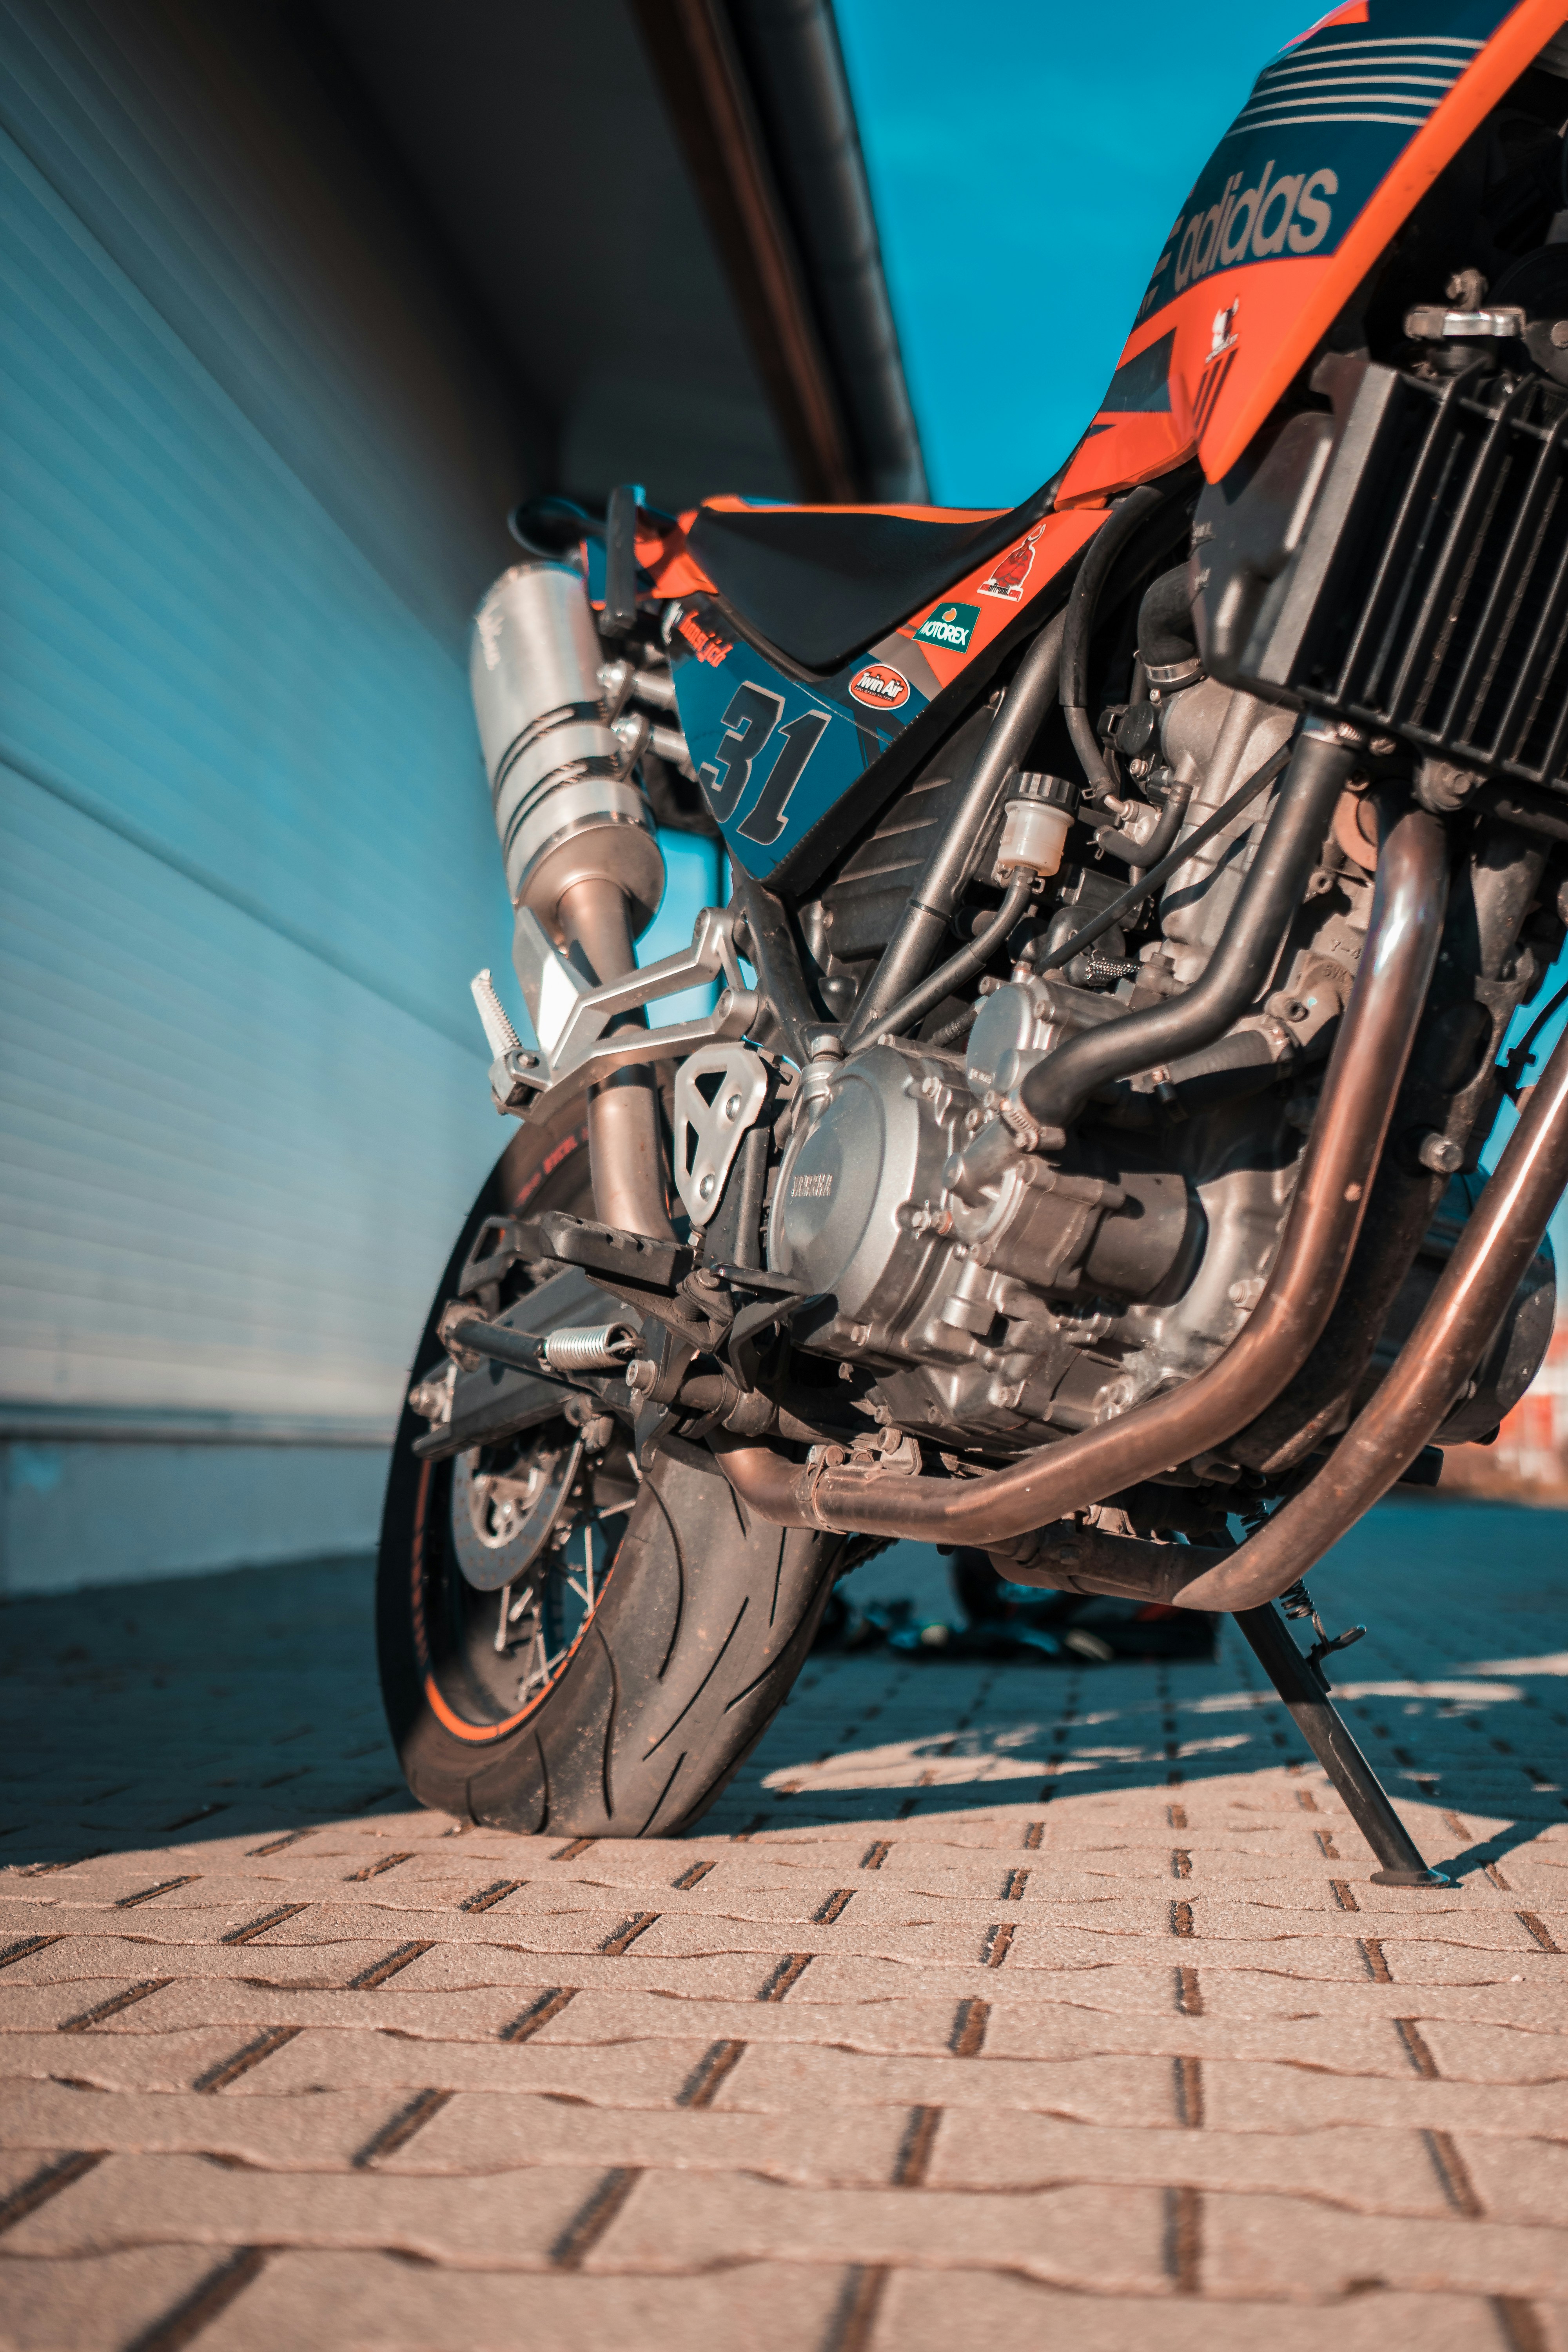 Choose from a curated selection of motorcycle photos. Always free on Unsplash.